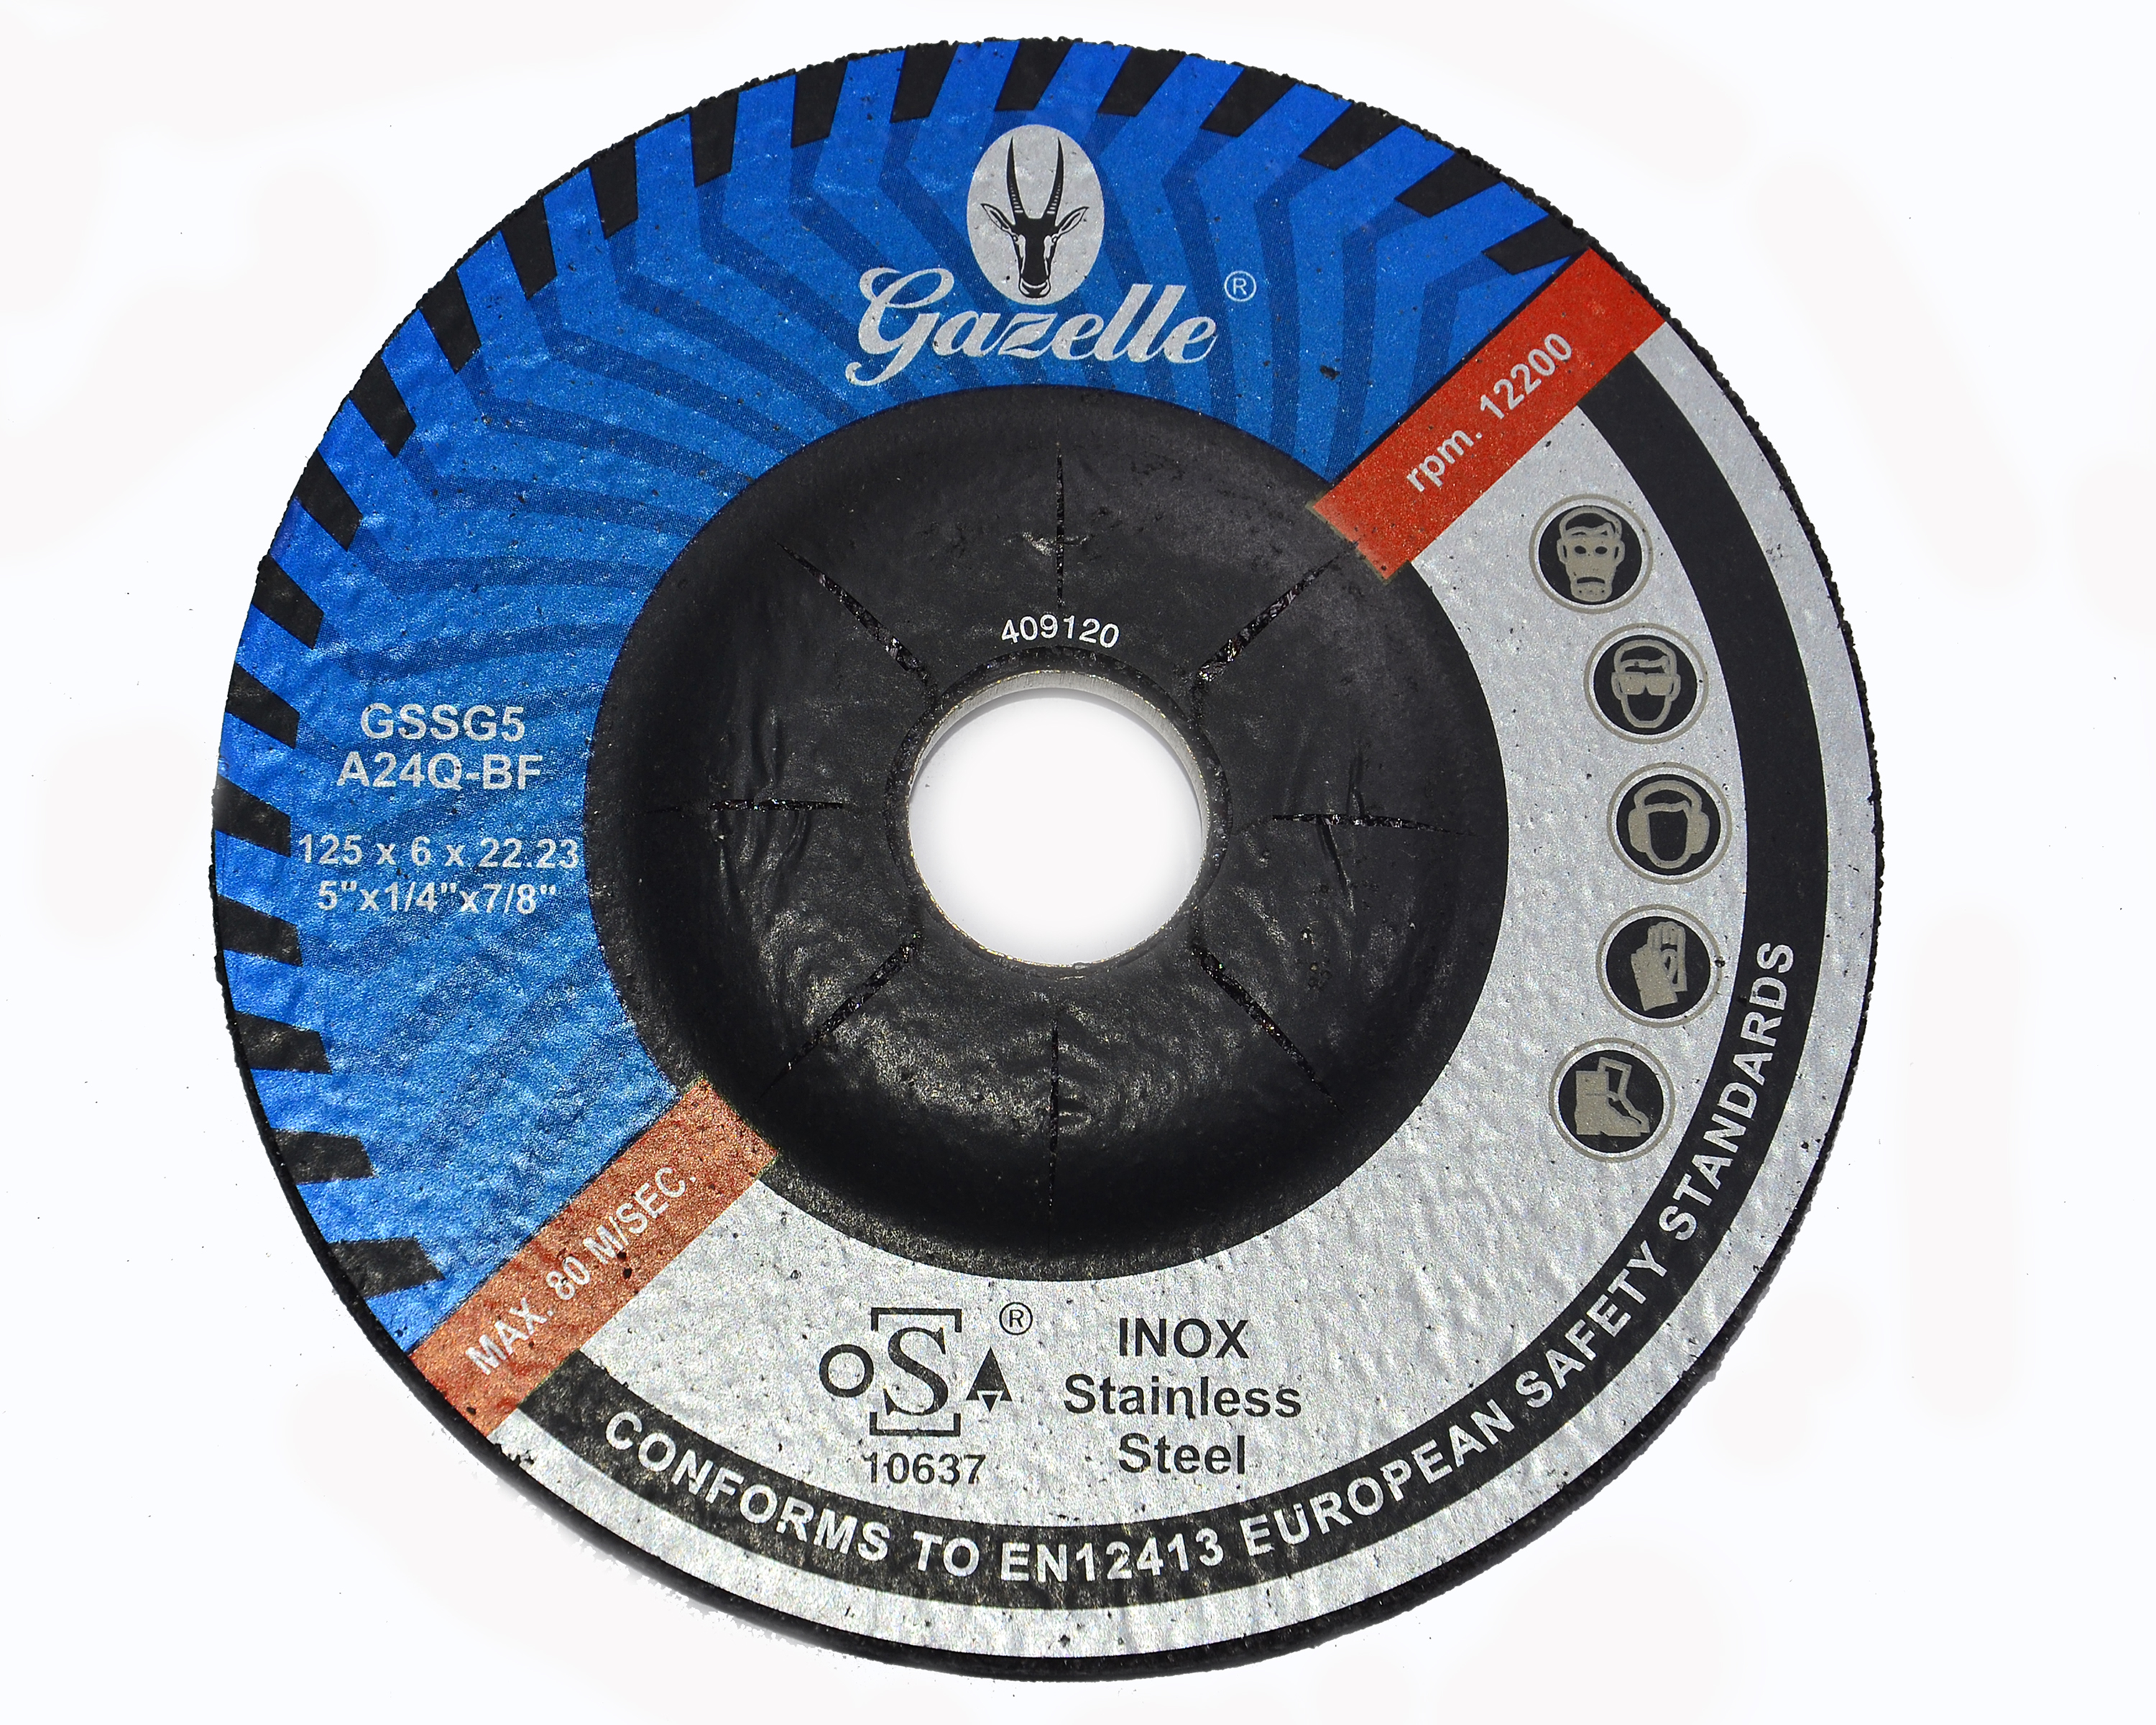 GAZELLE GSSG5 - Stainless Steel Grinding Disc 5in – 125 x 6 x 22mm